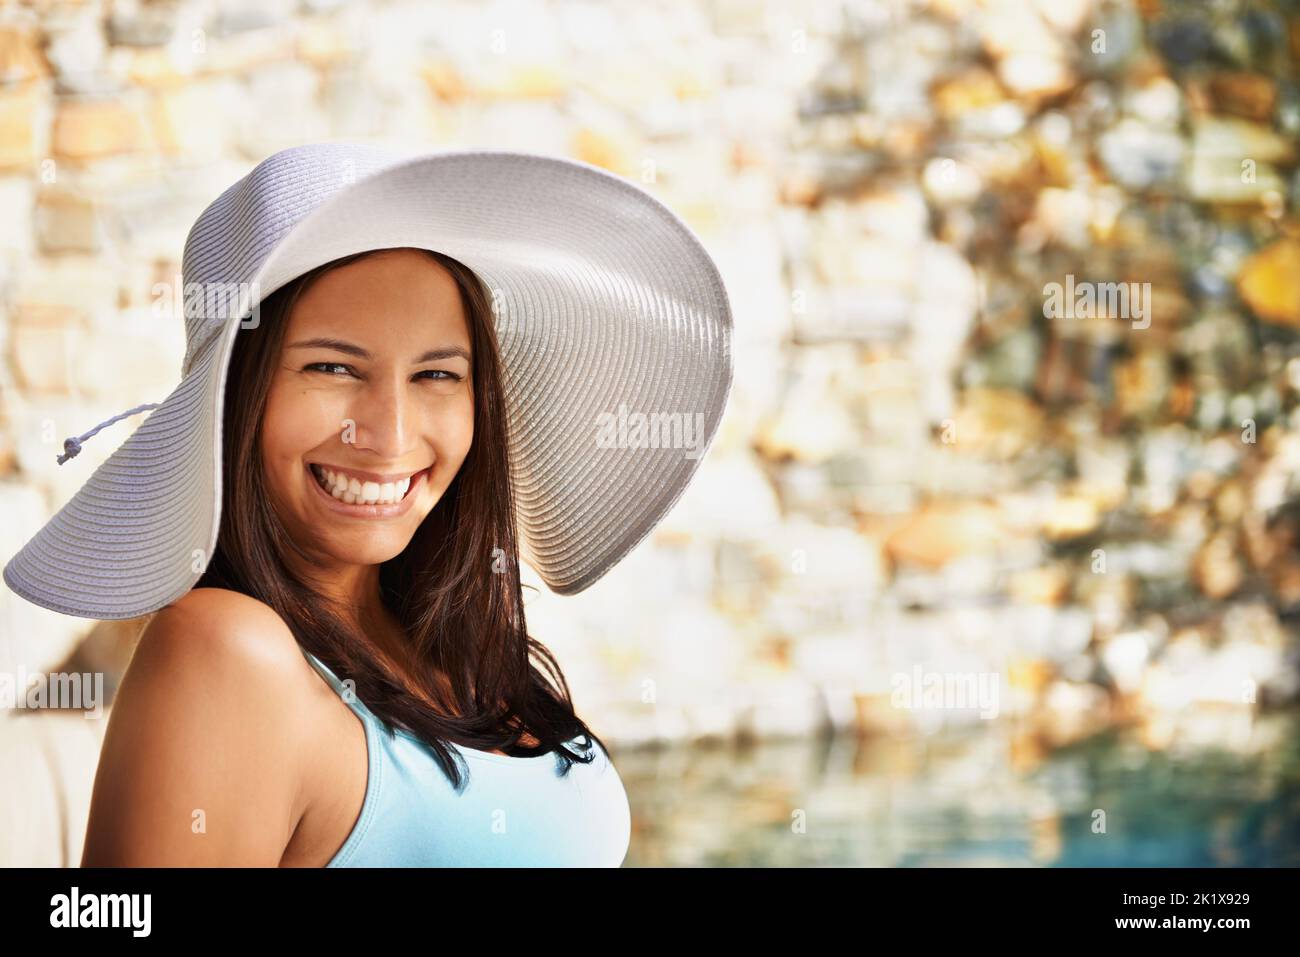 https://c8.alamy.com/comp/2K1X929/keeping-safe-from-the-sun-an-attractive-woman-wearing-a-sun-hat-while-relaxing-near-a-pool-2K1X929.jpg